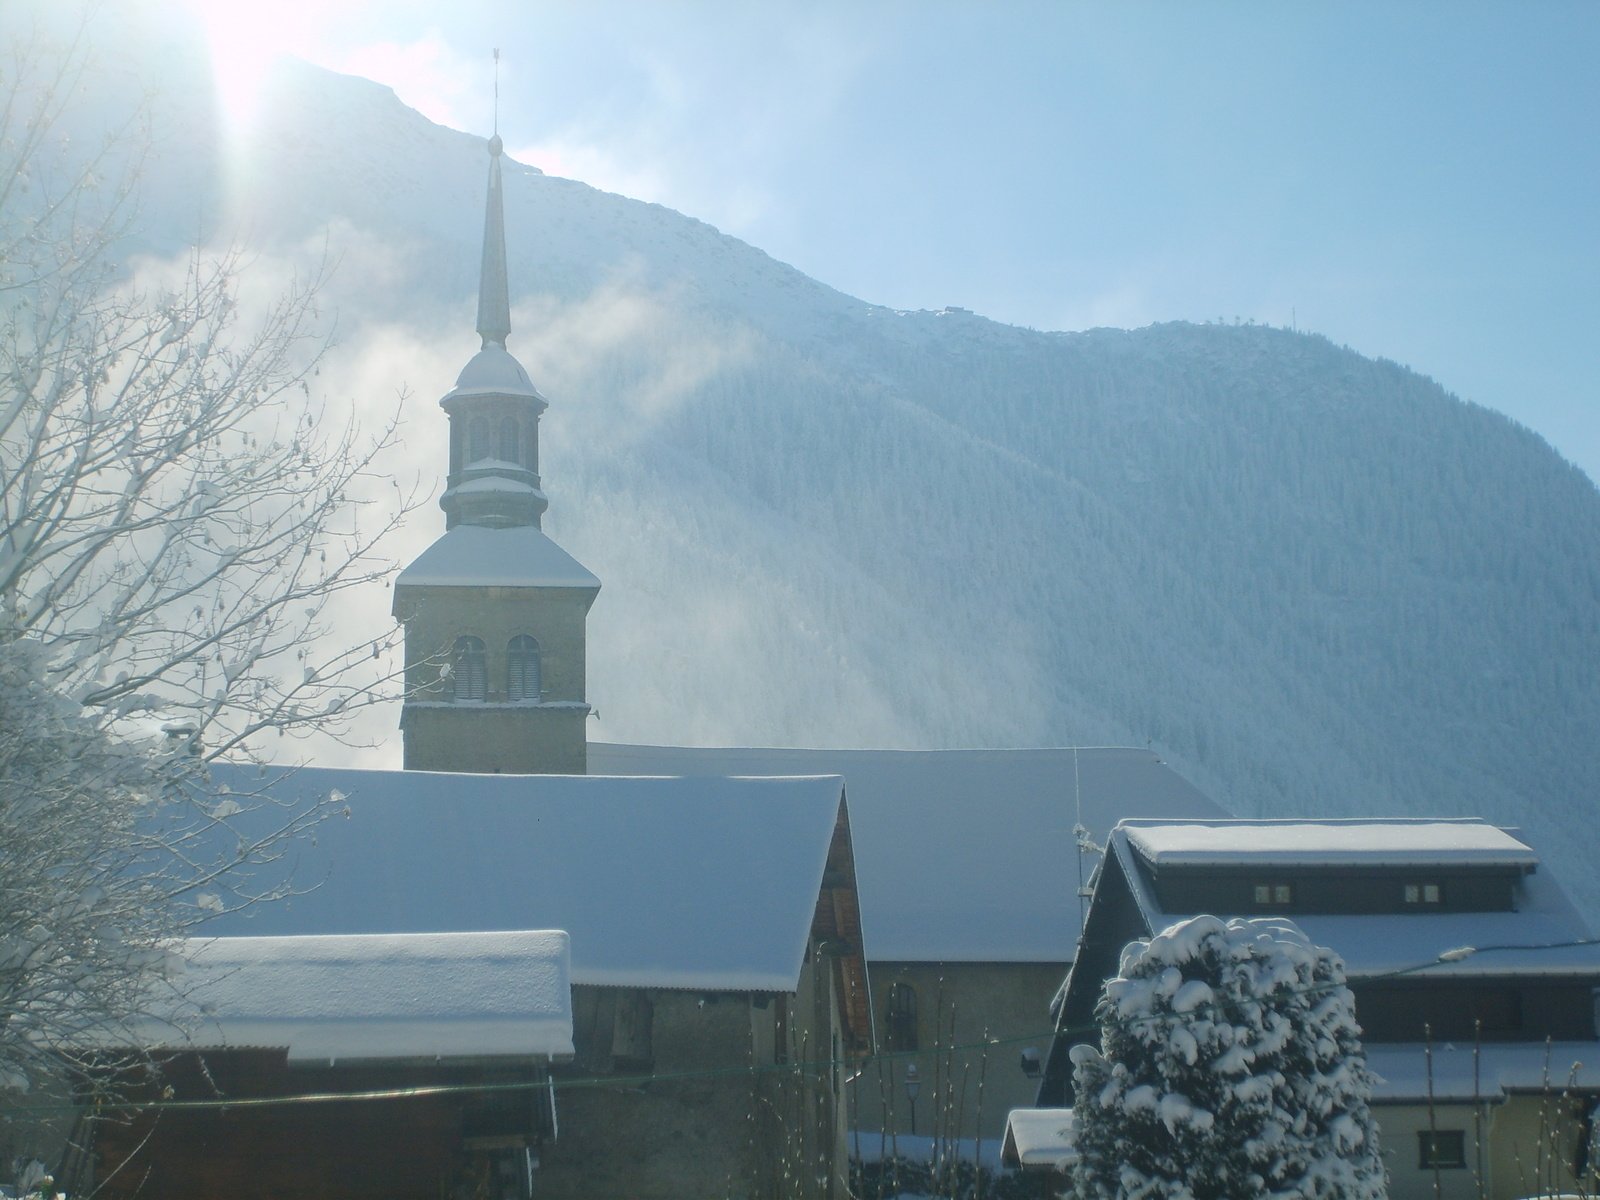 a snowy mountain scene with a church steeple in the background